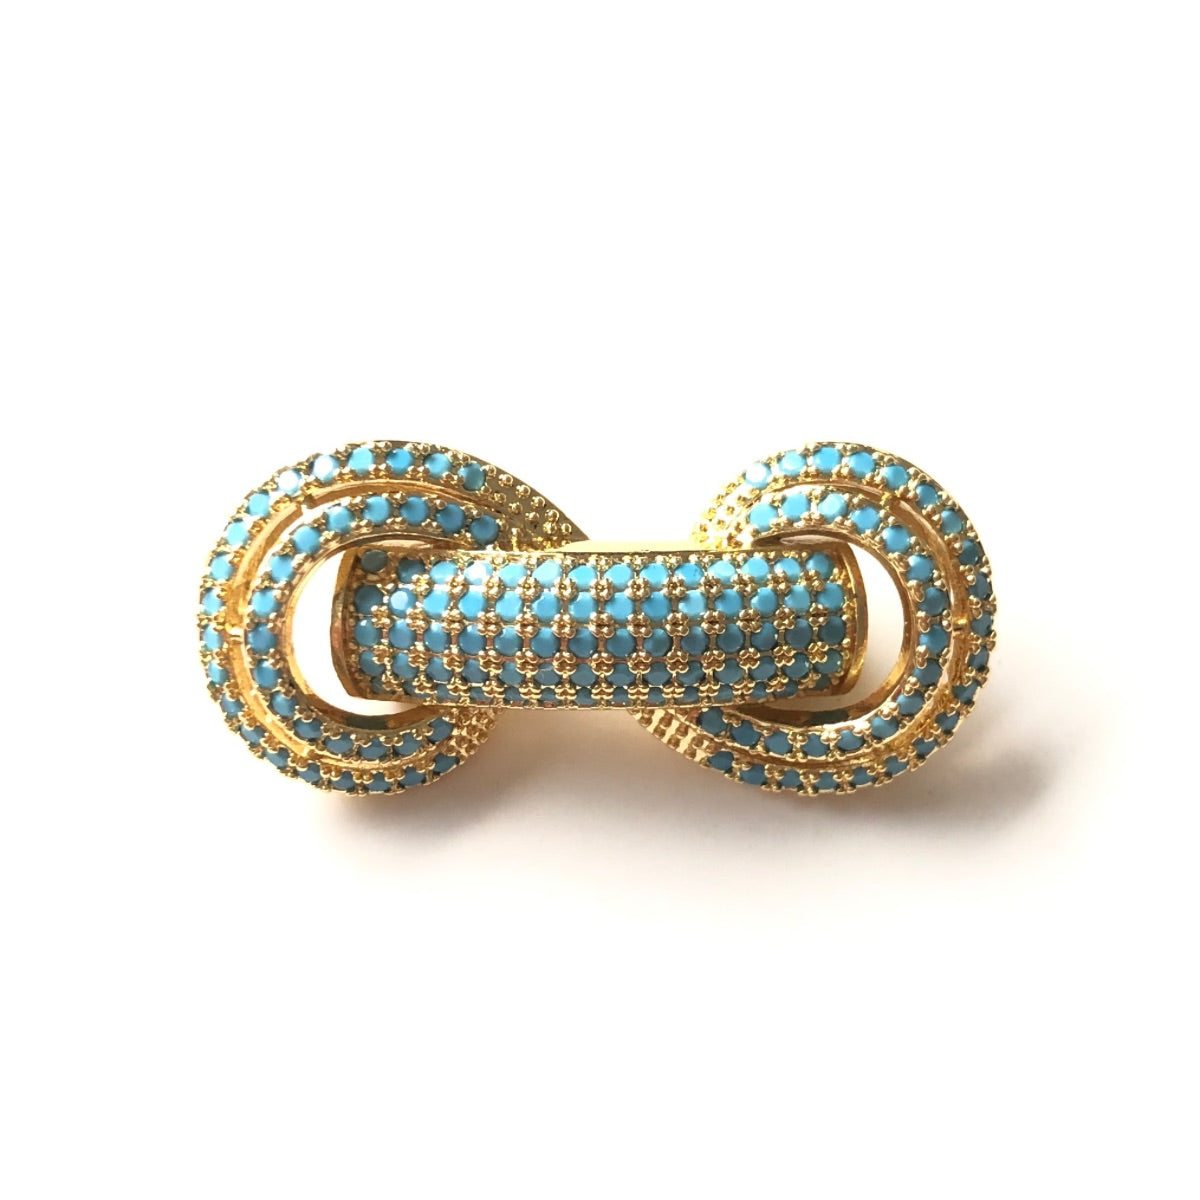 5pcs/lot 31*14.5*8mm Turquoise CZ Paved Tube Bar Spacers Gold CZ Paved Spacers Colorful Zirconia New Spacers Arrivals Tube Bar Centerpieces Charms Beads Beyond